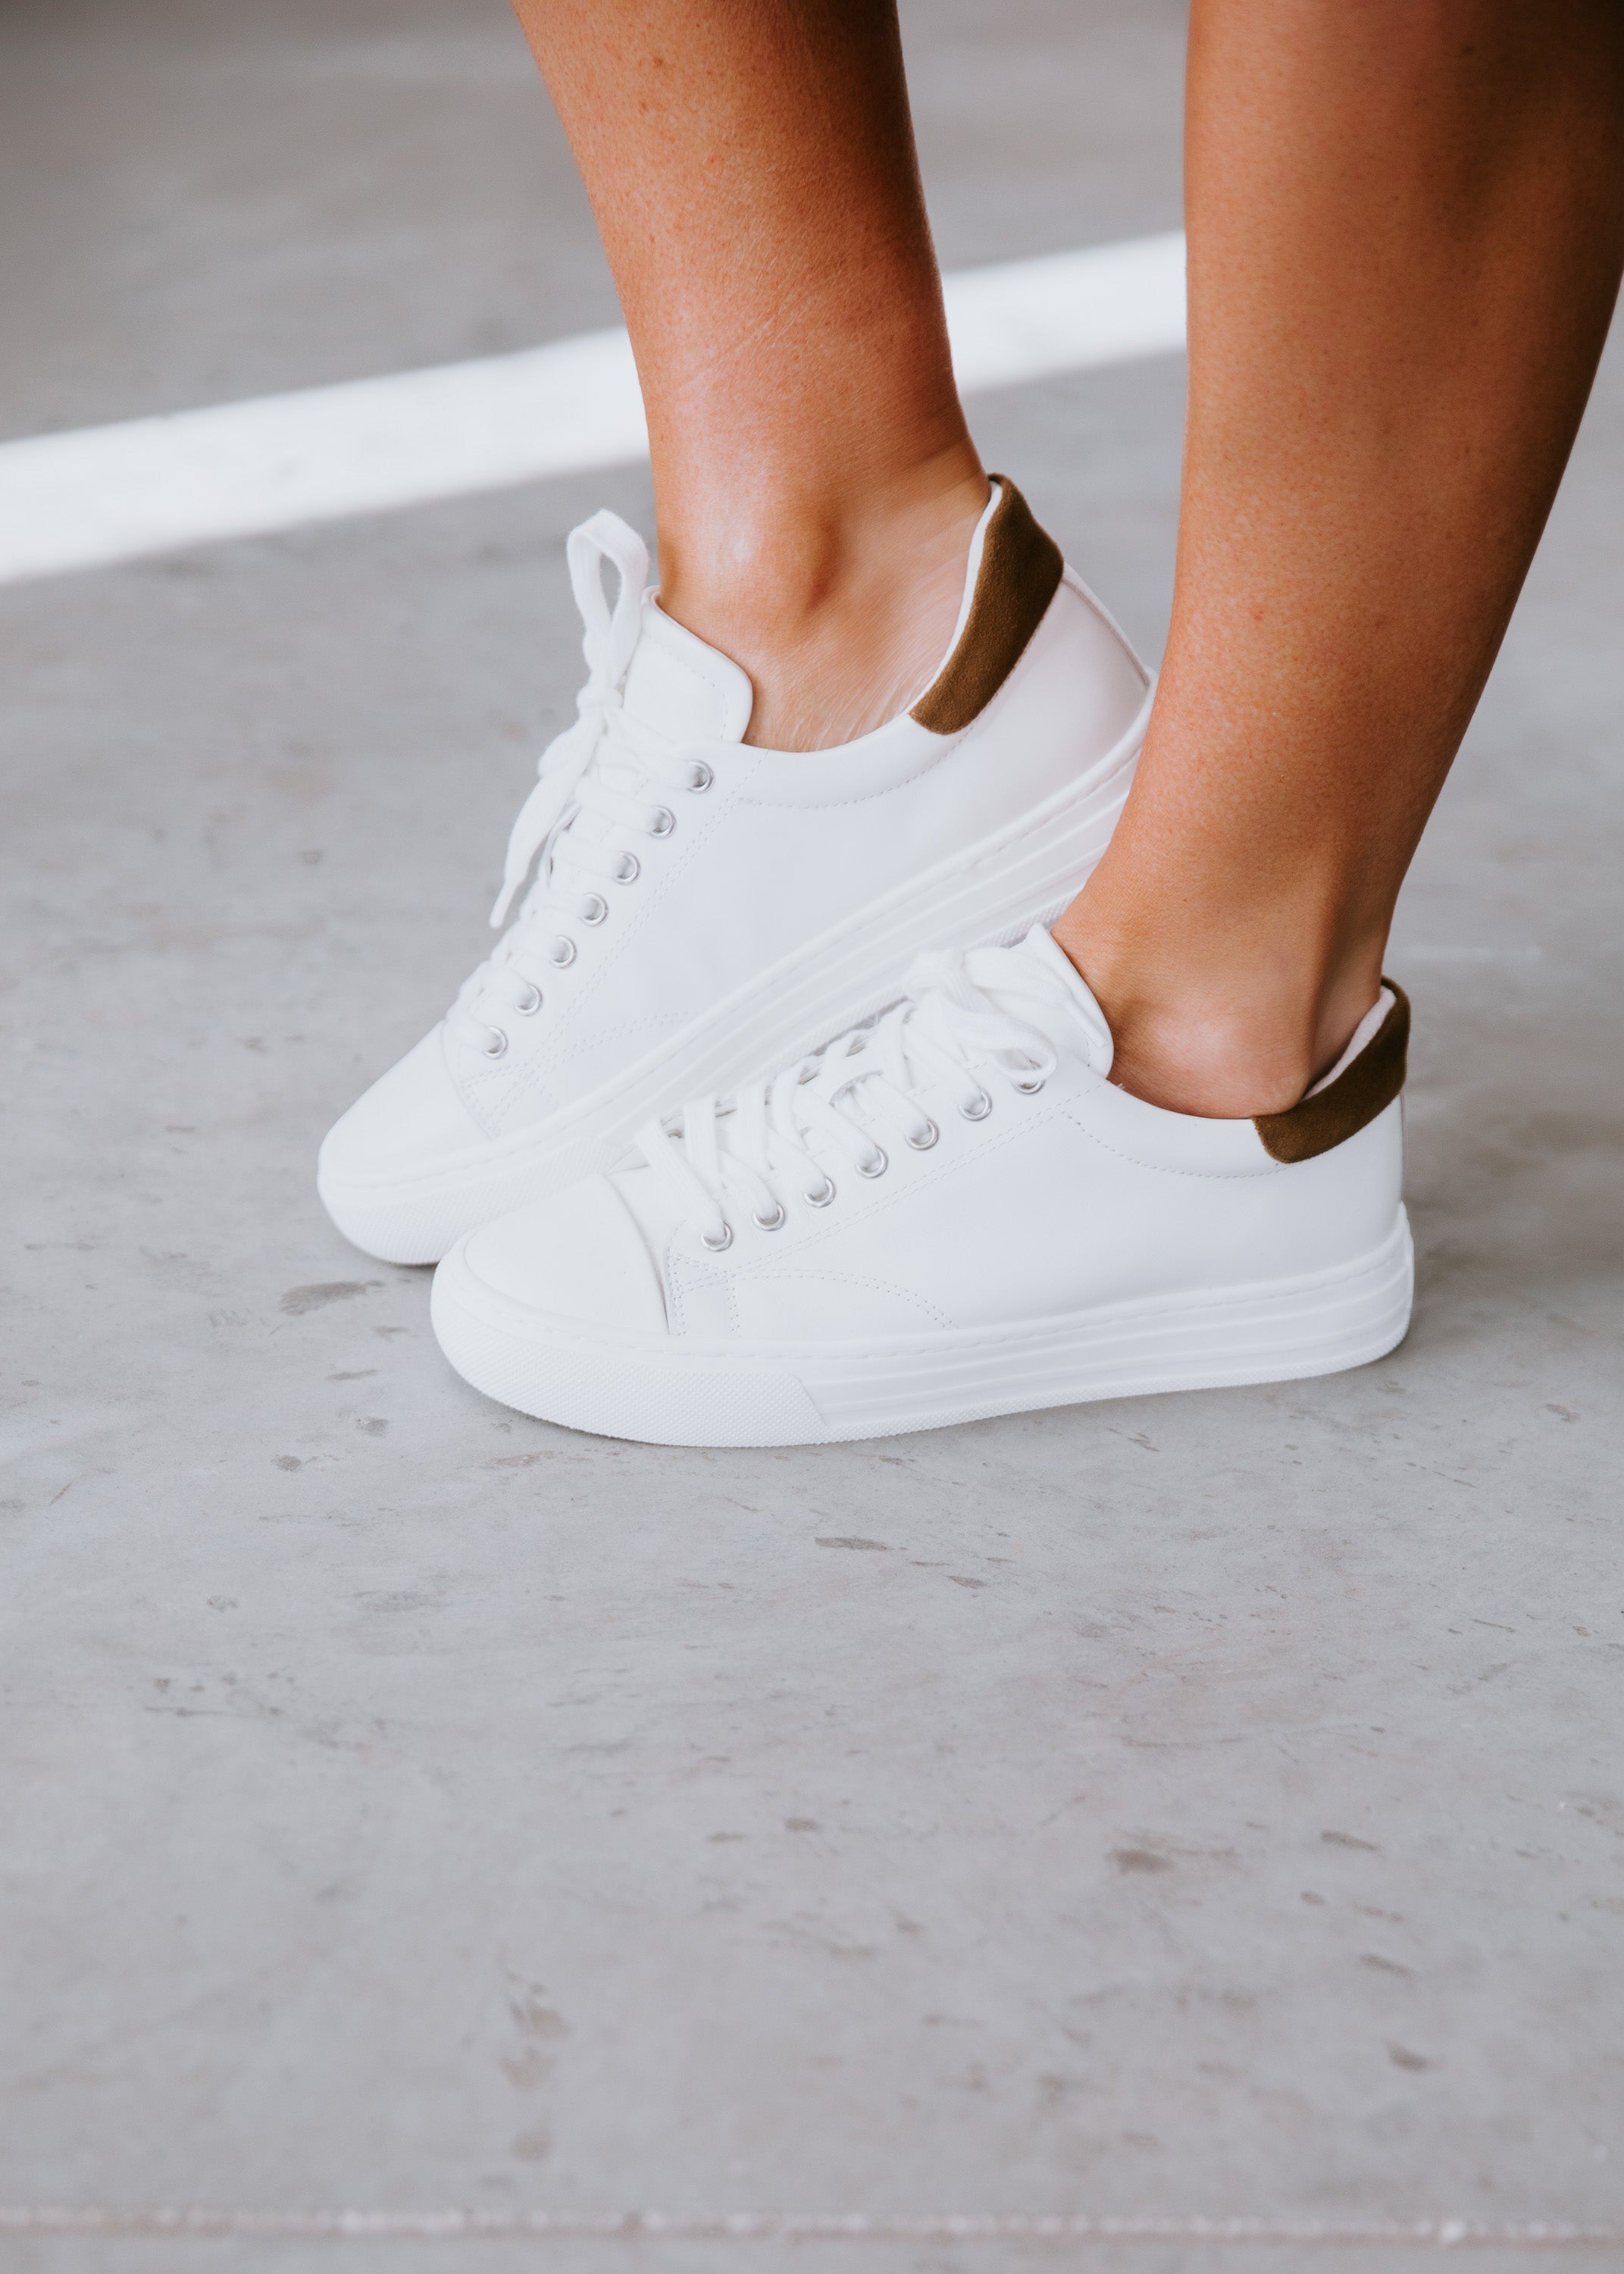 image of Steve Madden Captivate Sneakers